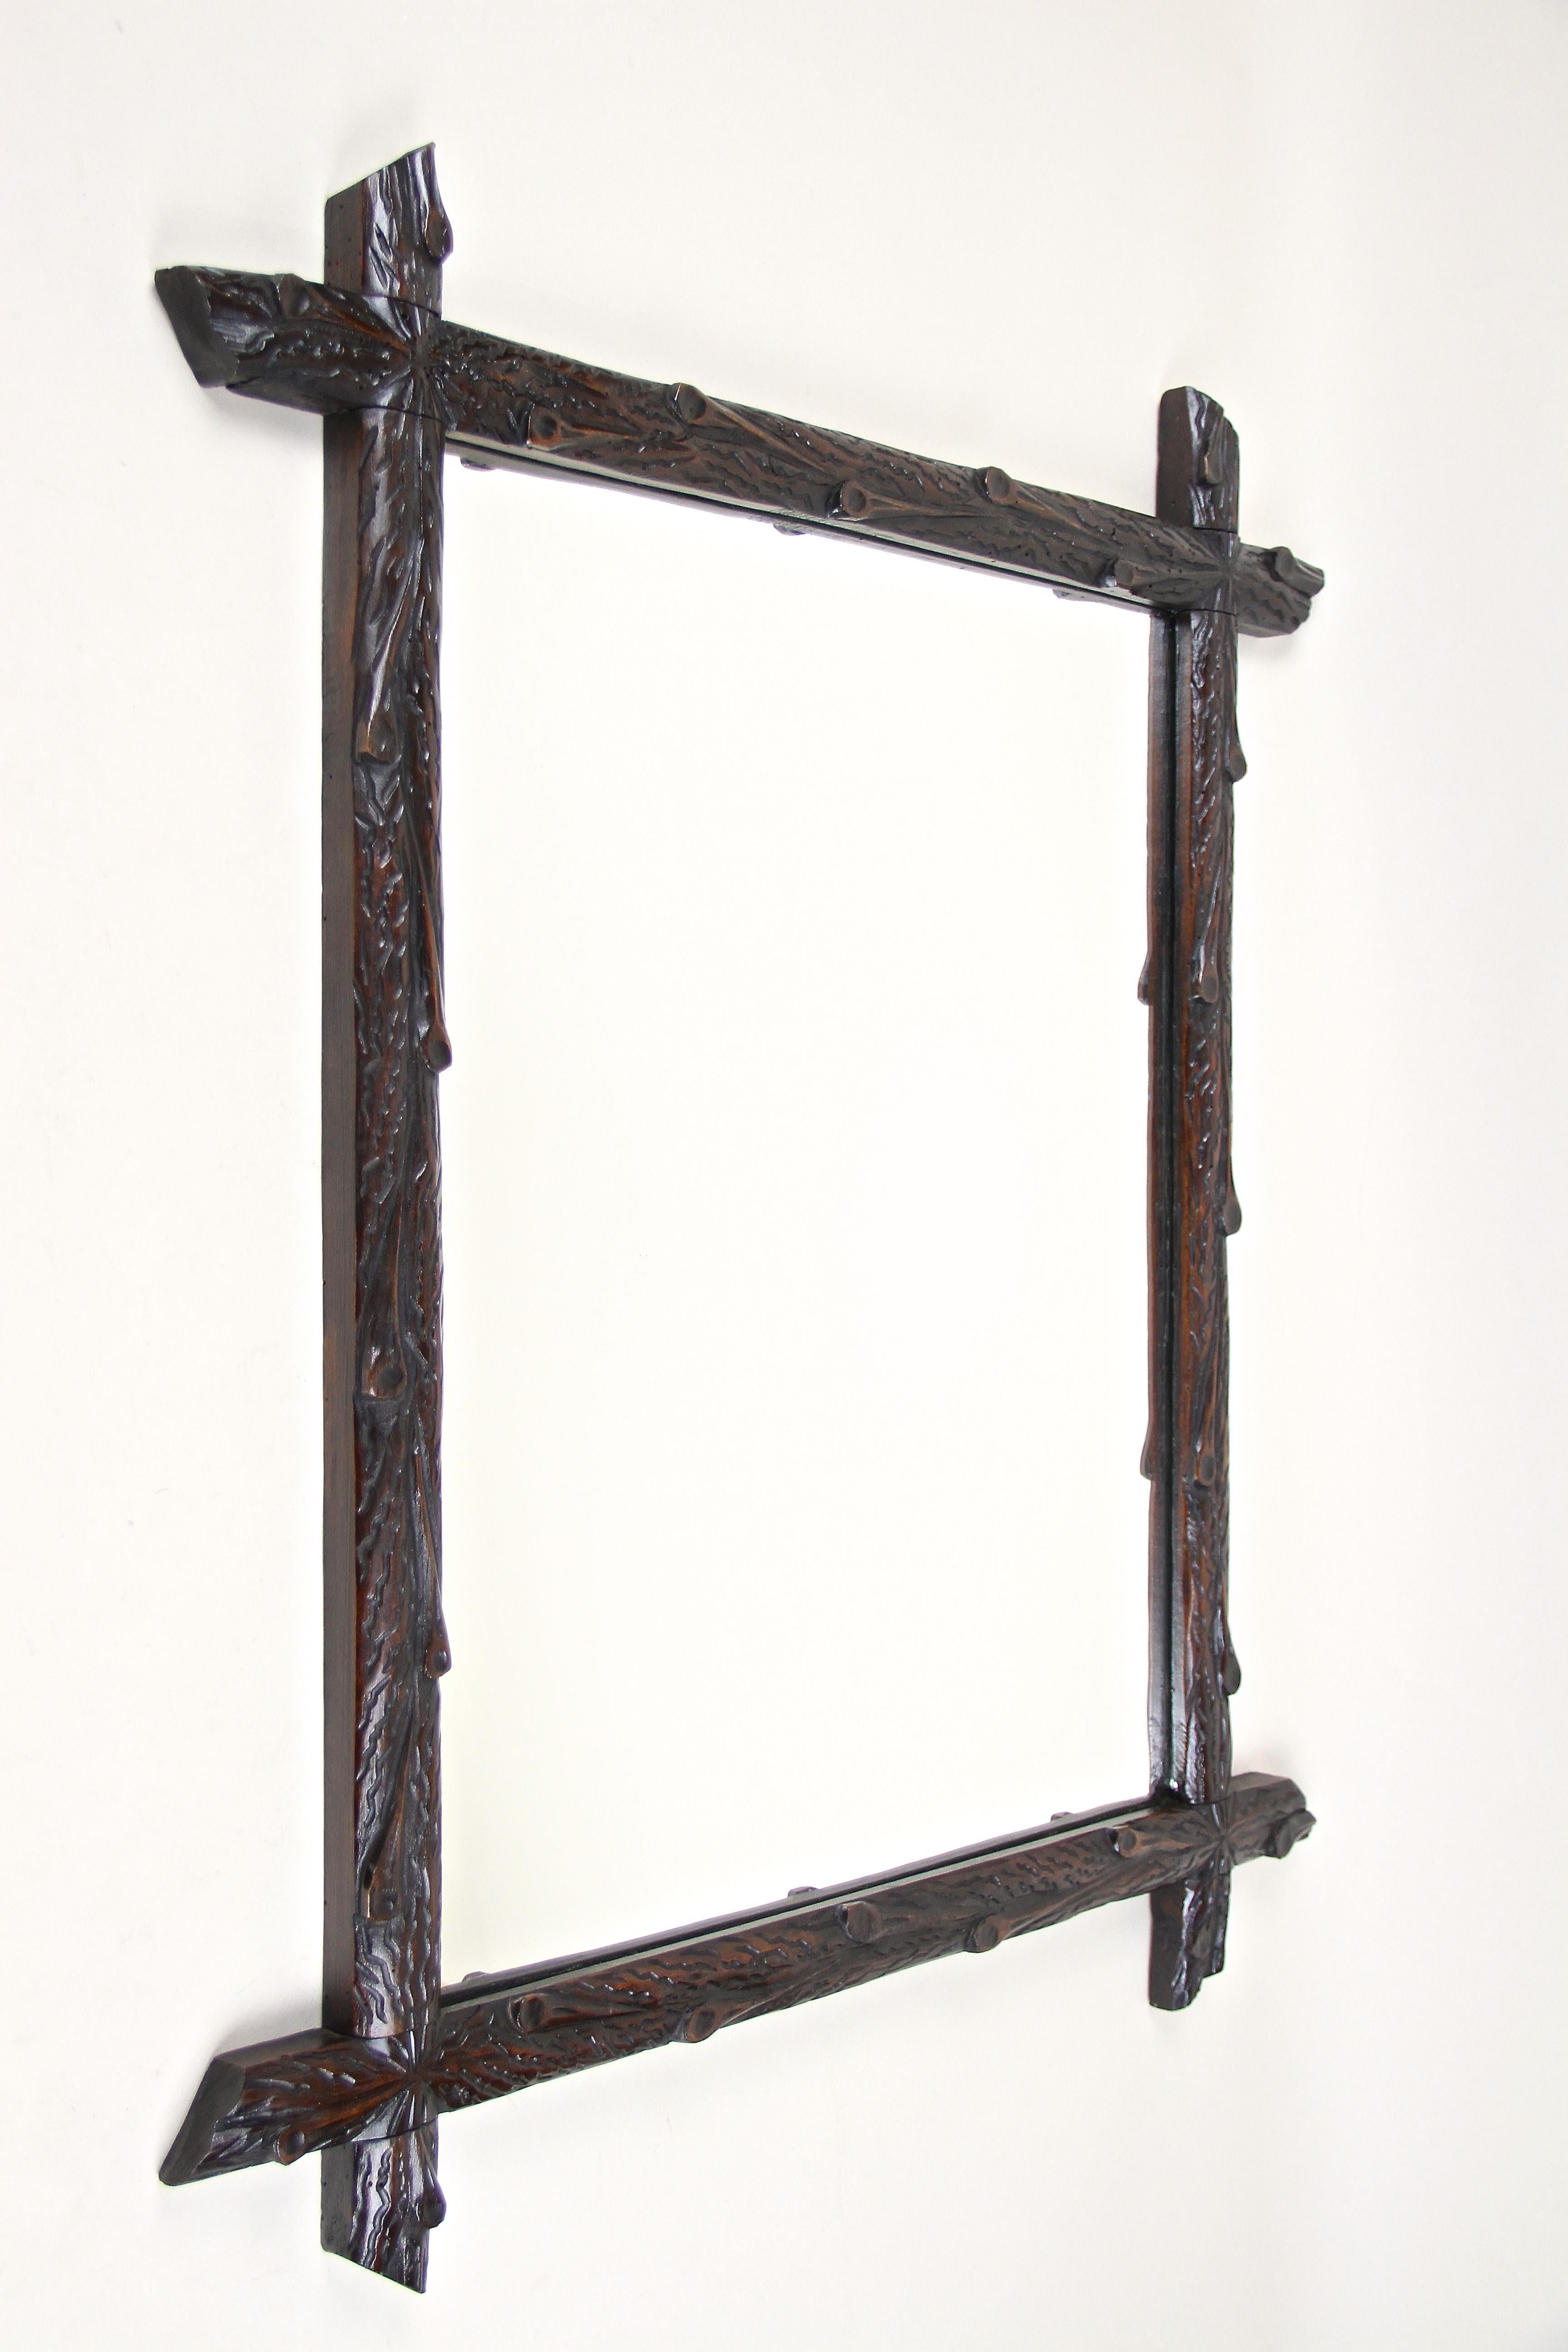 Unique Black Forest wall mirror from the late 19th century in Austria. Around 1880 this rustic wooden mirror has been elaborately hand carved out of basswood showing a very uncommon 